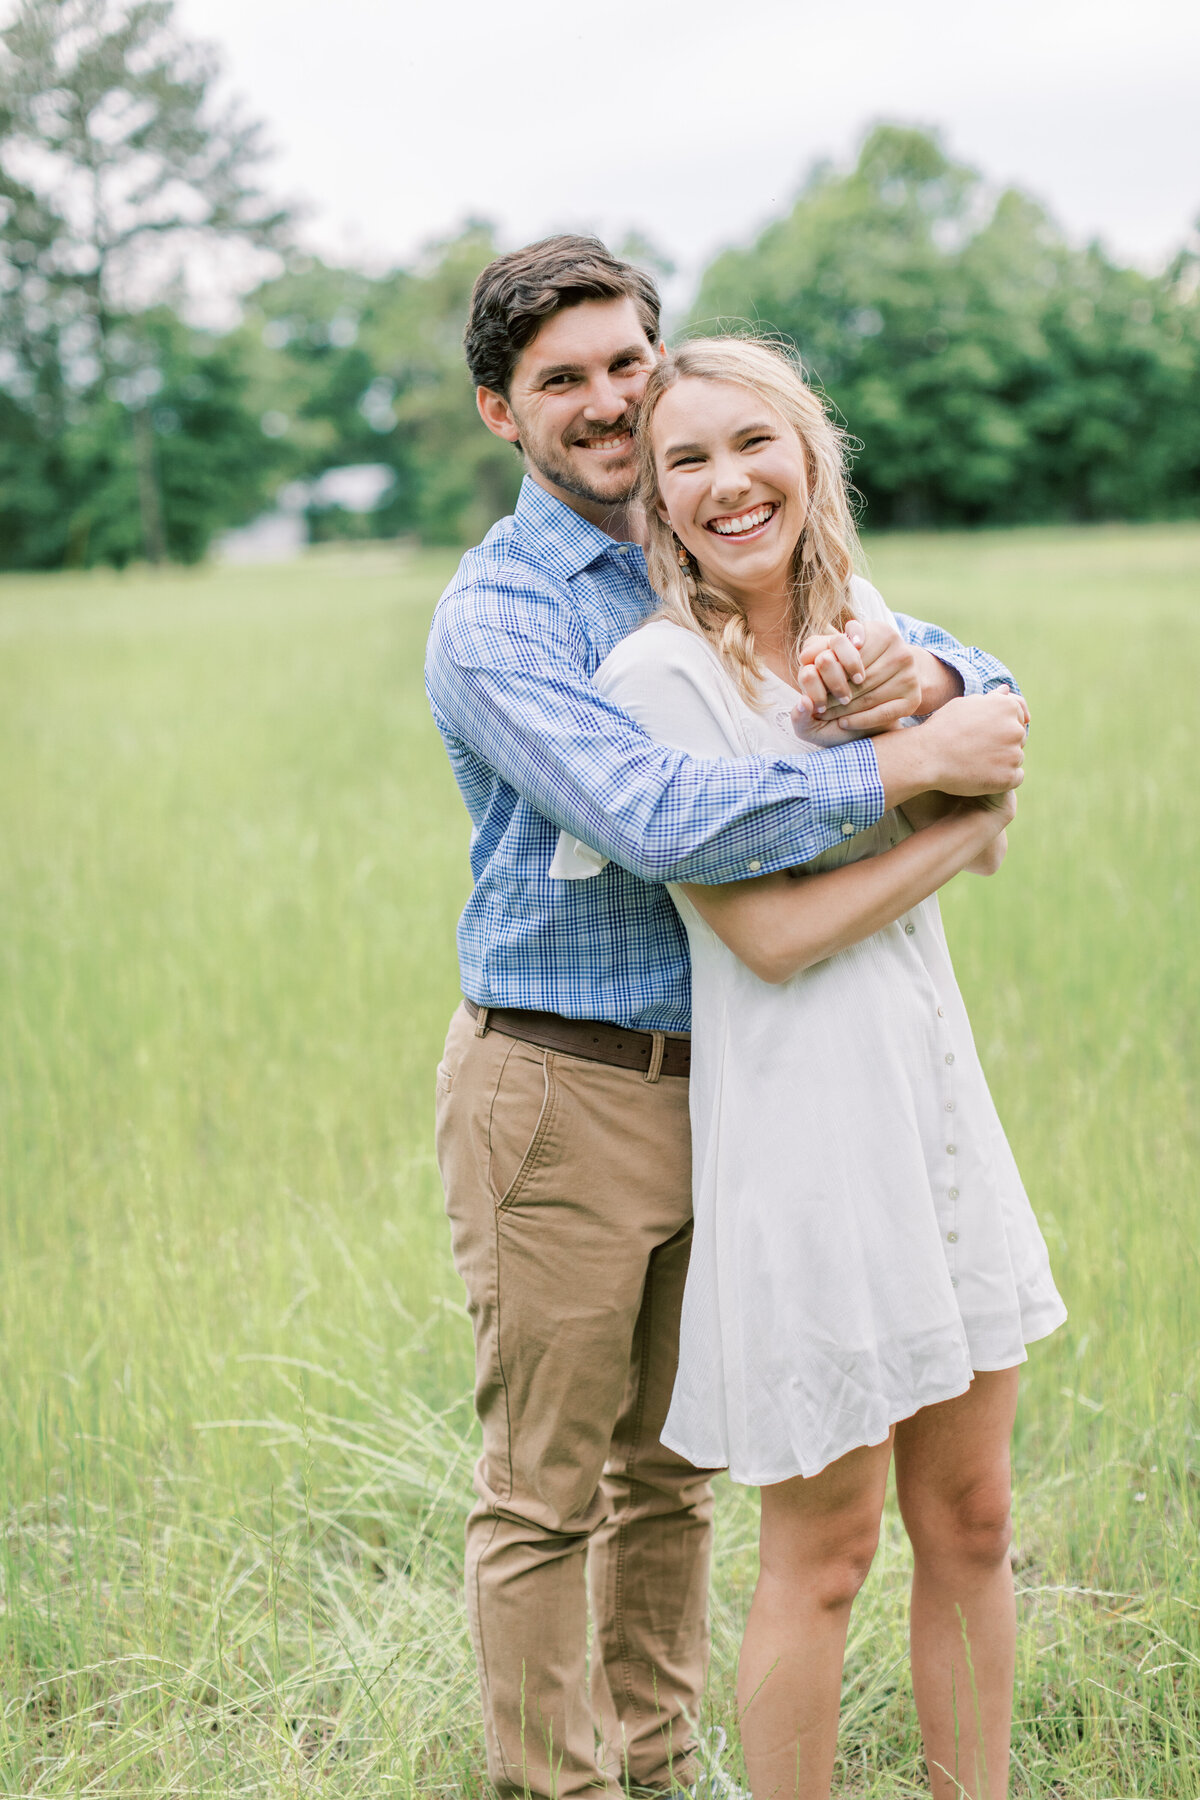 A couple stands in a grassy field for their engagement photos.